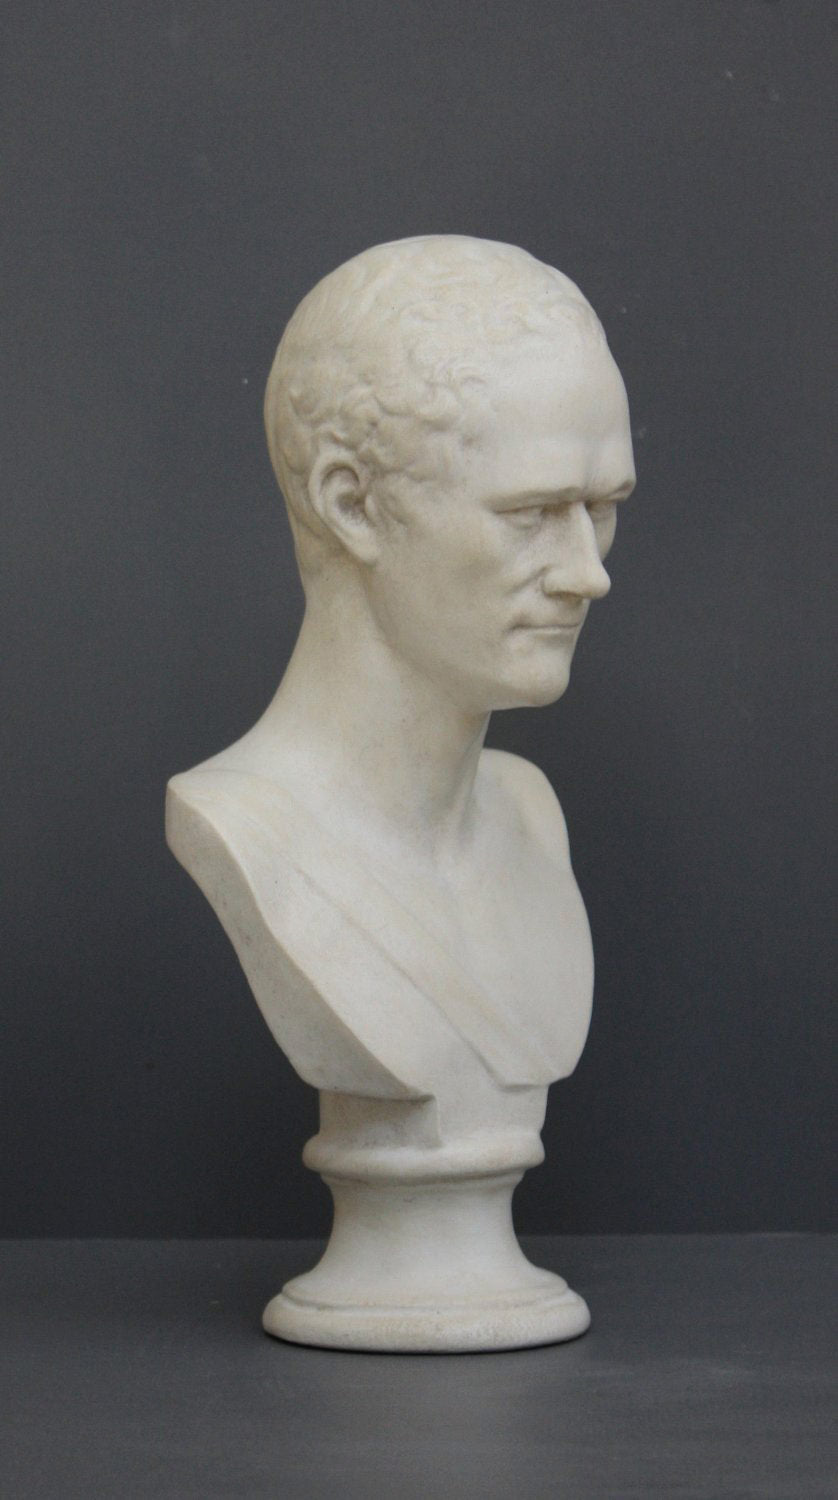 photo of white plaster cast bust of man, namely Alexander Hamilton, against gray background